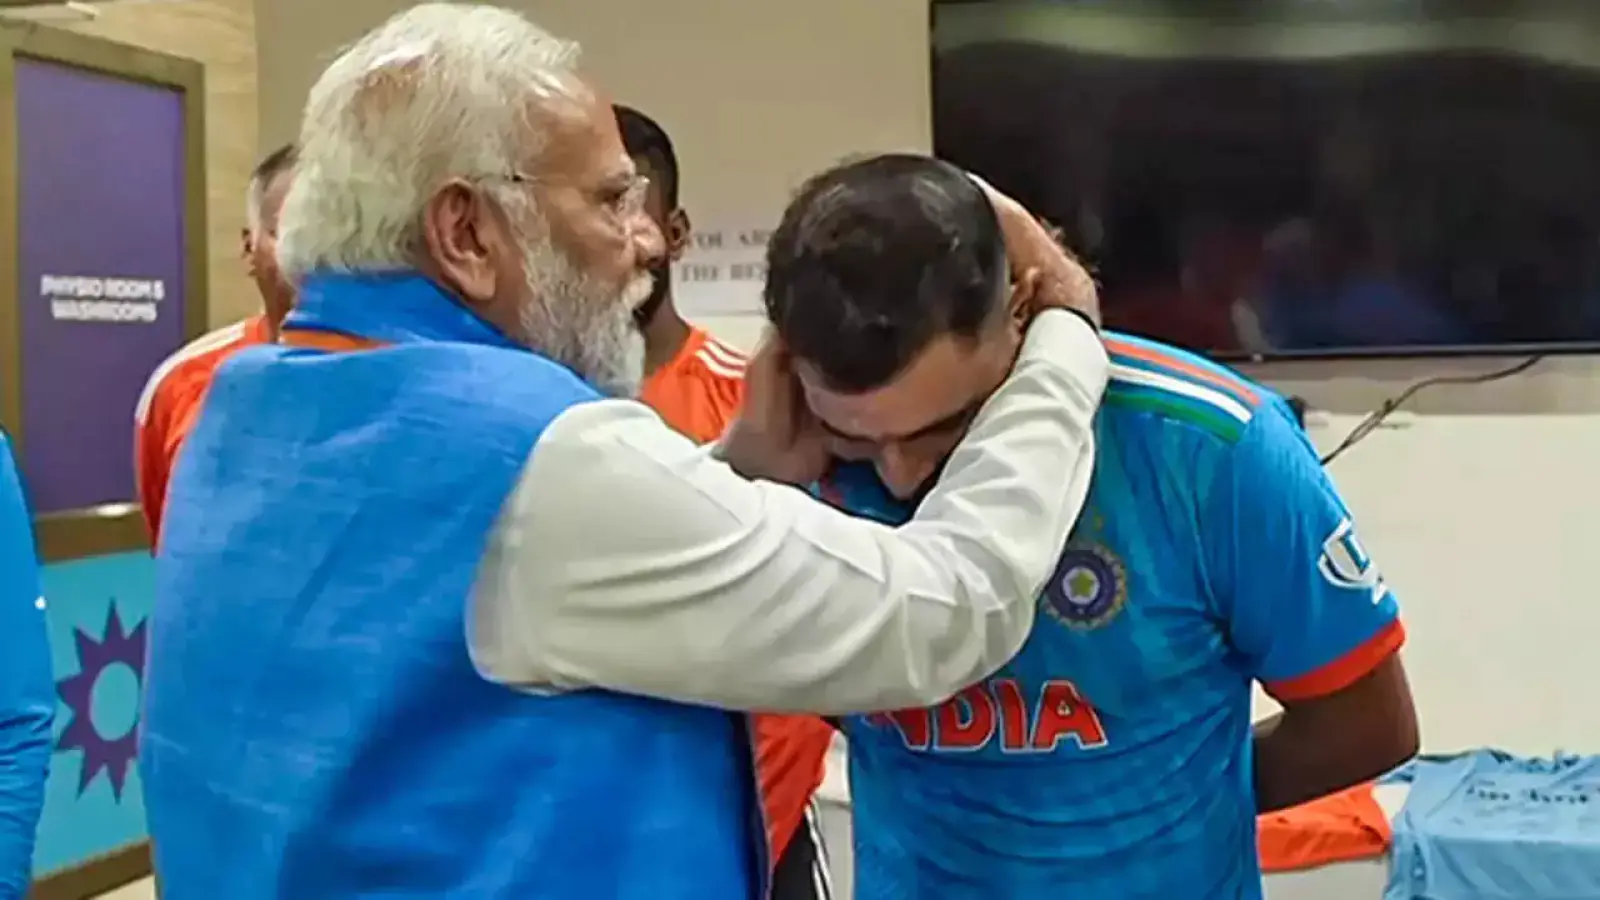 PM Modi boosted morale after Mohammed Shami's operation, know what he said